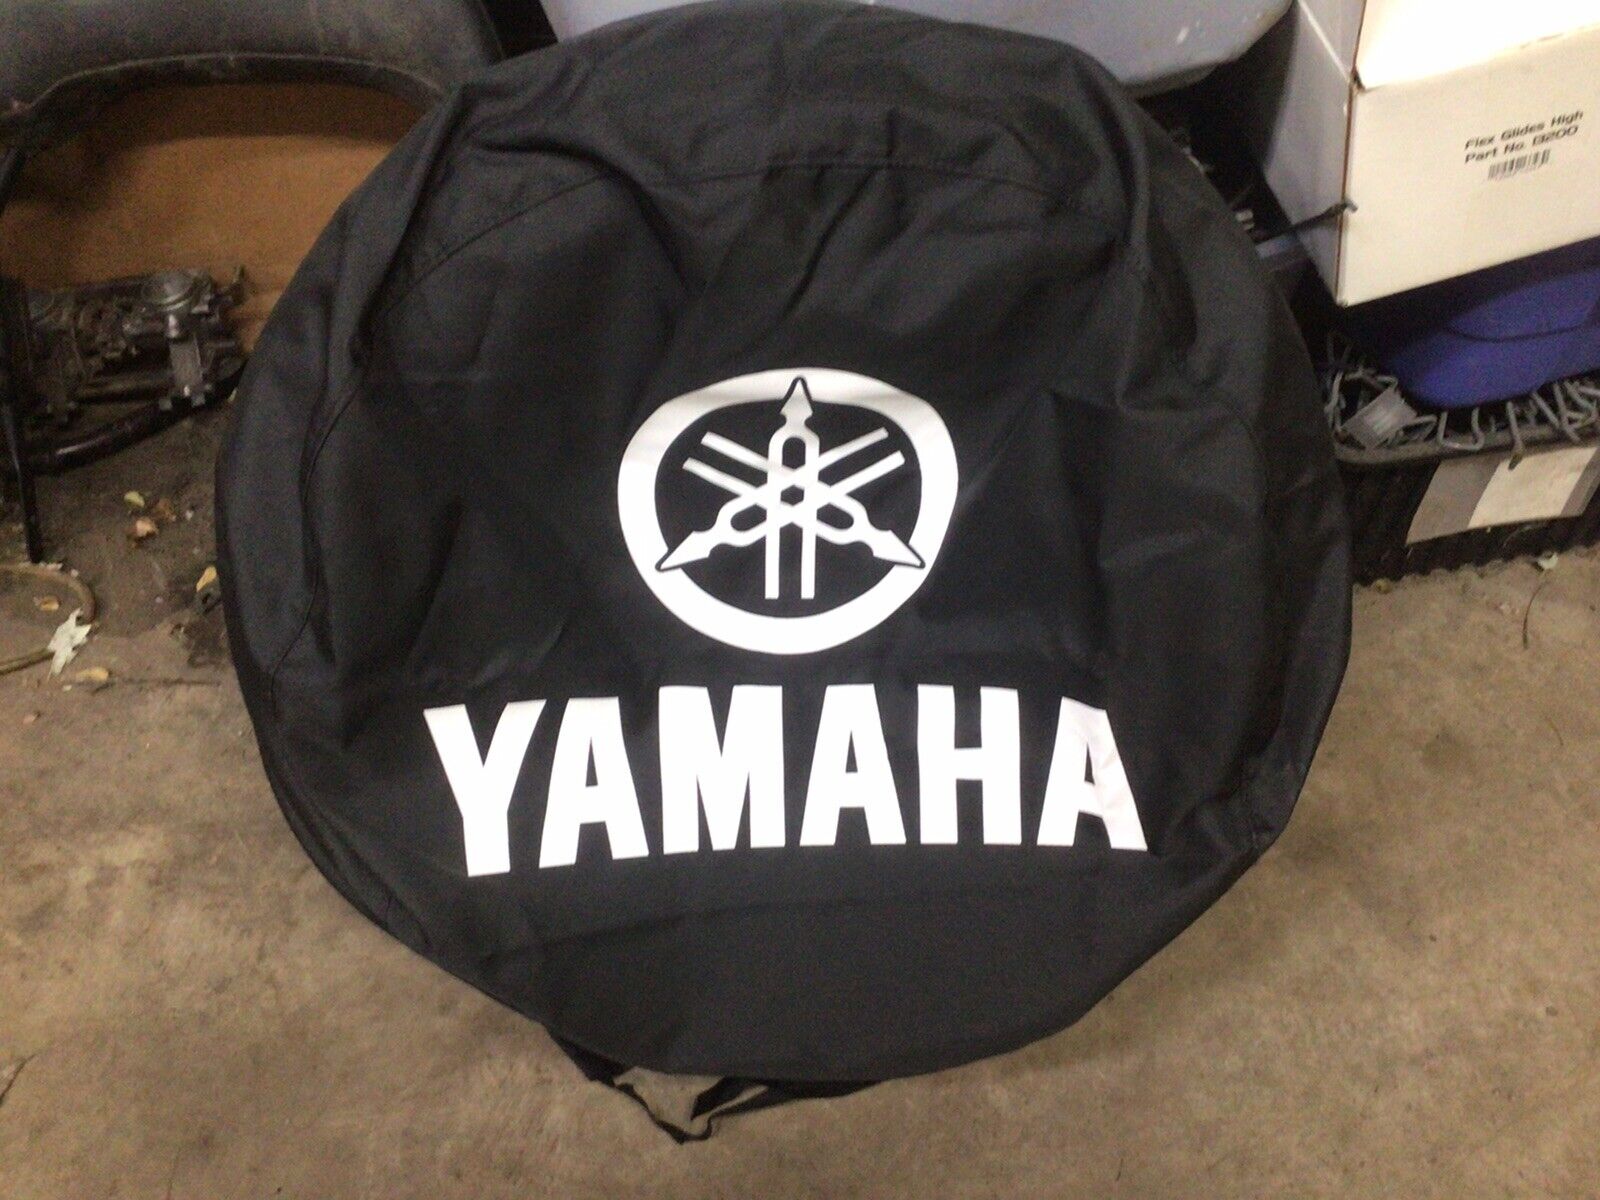 YAMAHA  Car camper trailer Spare ￼￼ TIRE COVER Snowmobile Motorcycle